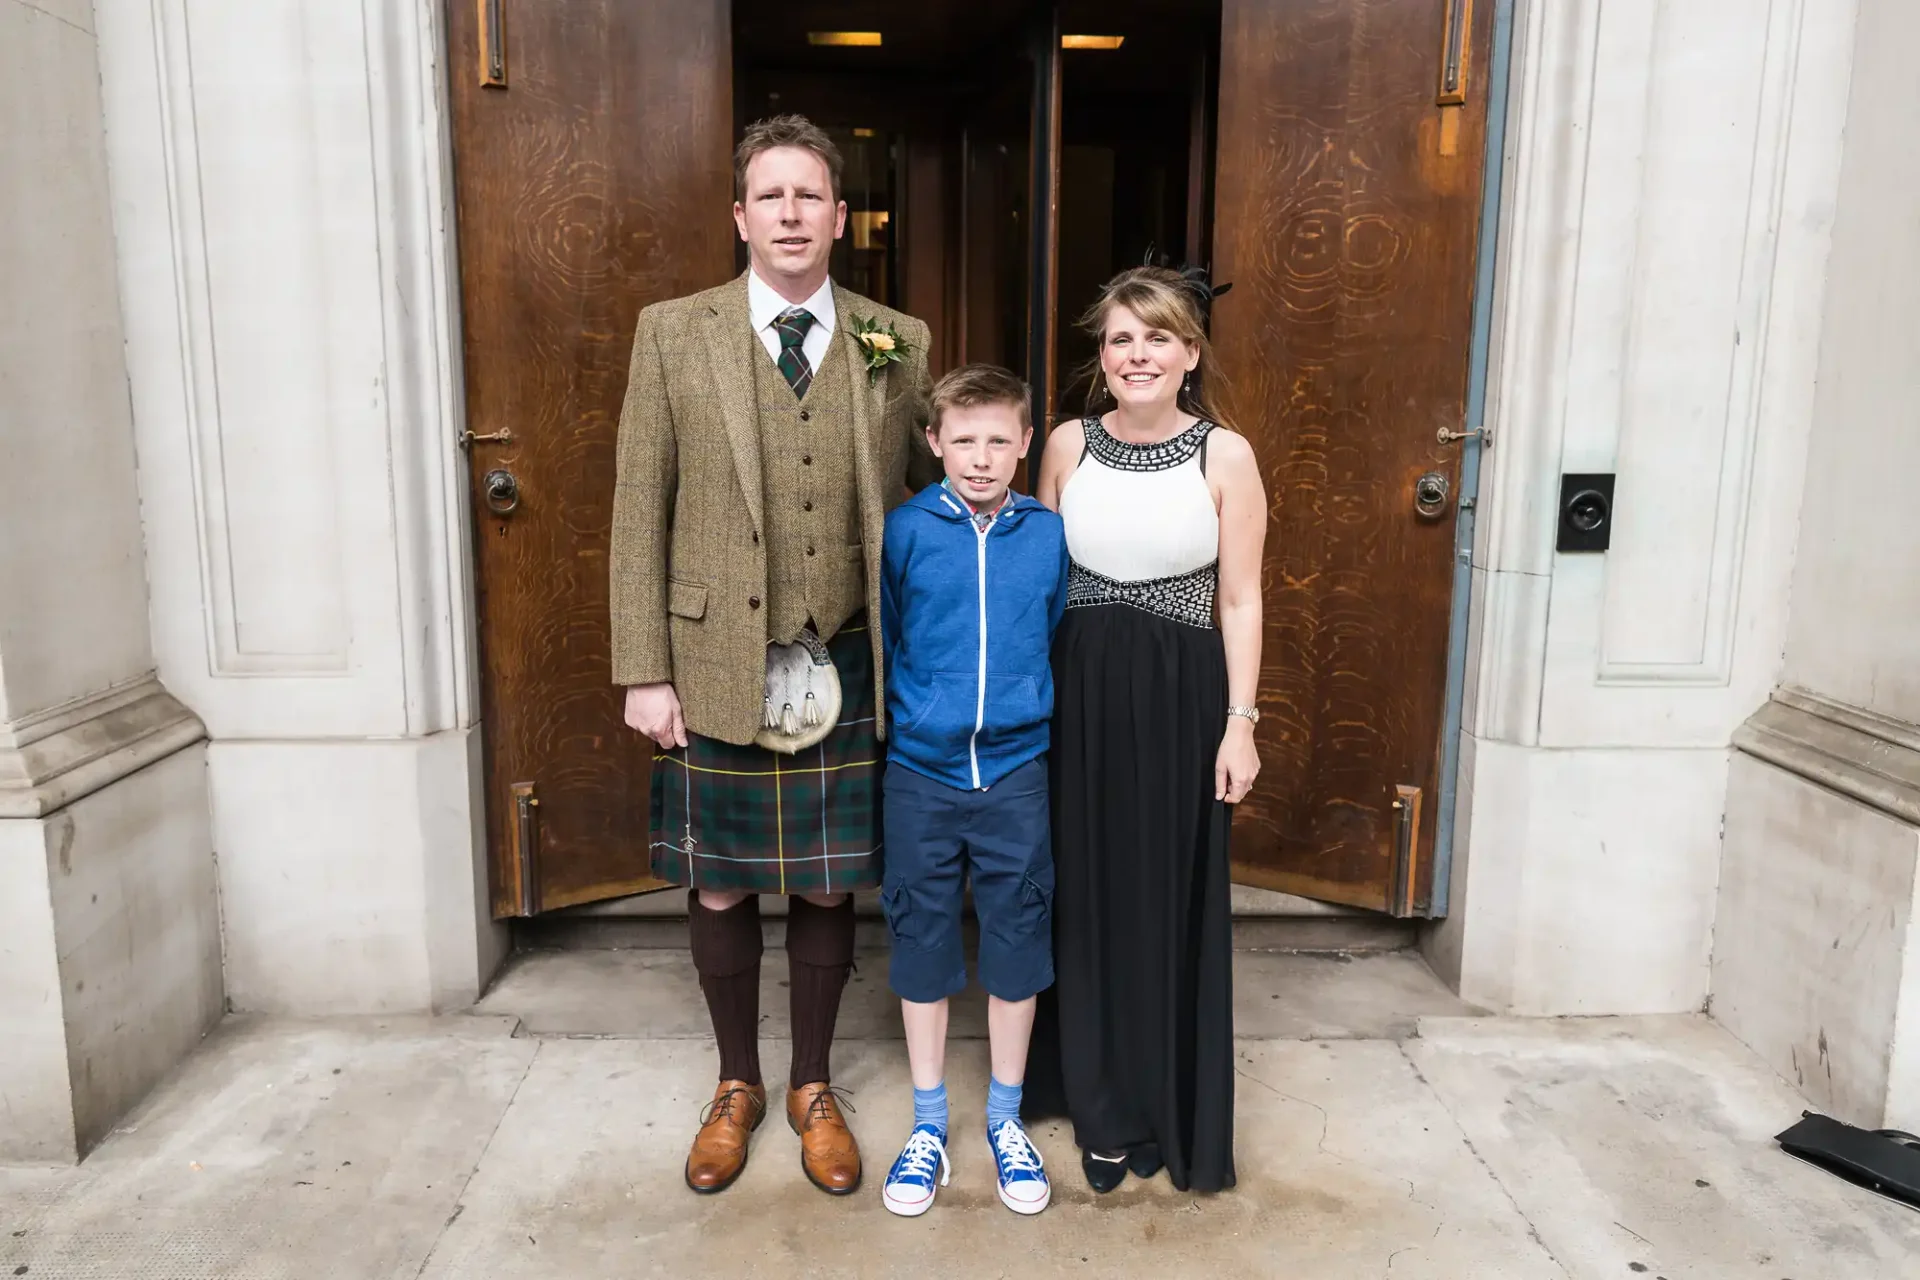 A family of three standing in front of a building entrance; the man wears a kilt, the boy is in a suit with sneakers, and the woman is in a long black dress.